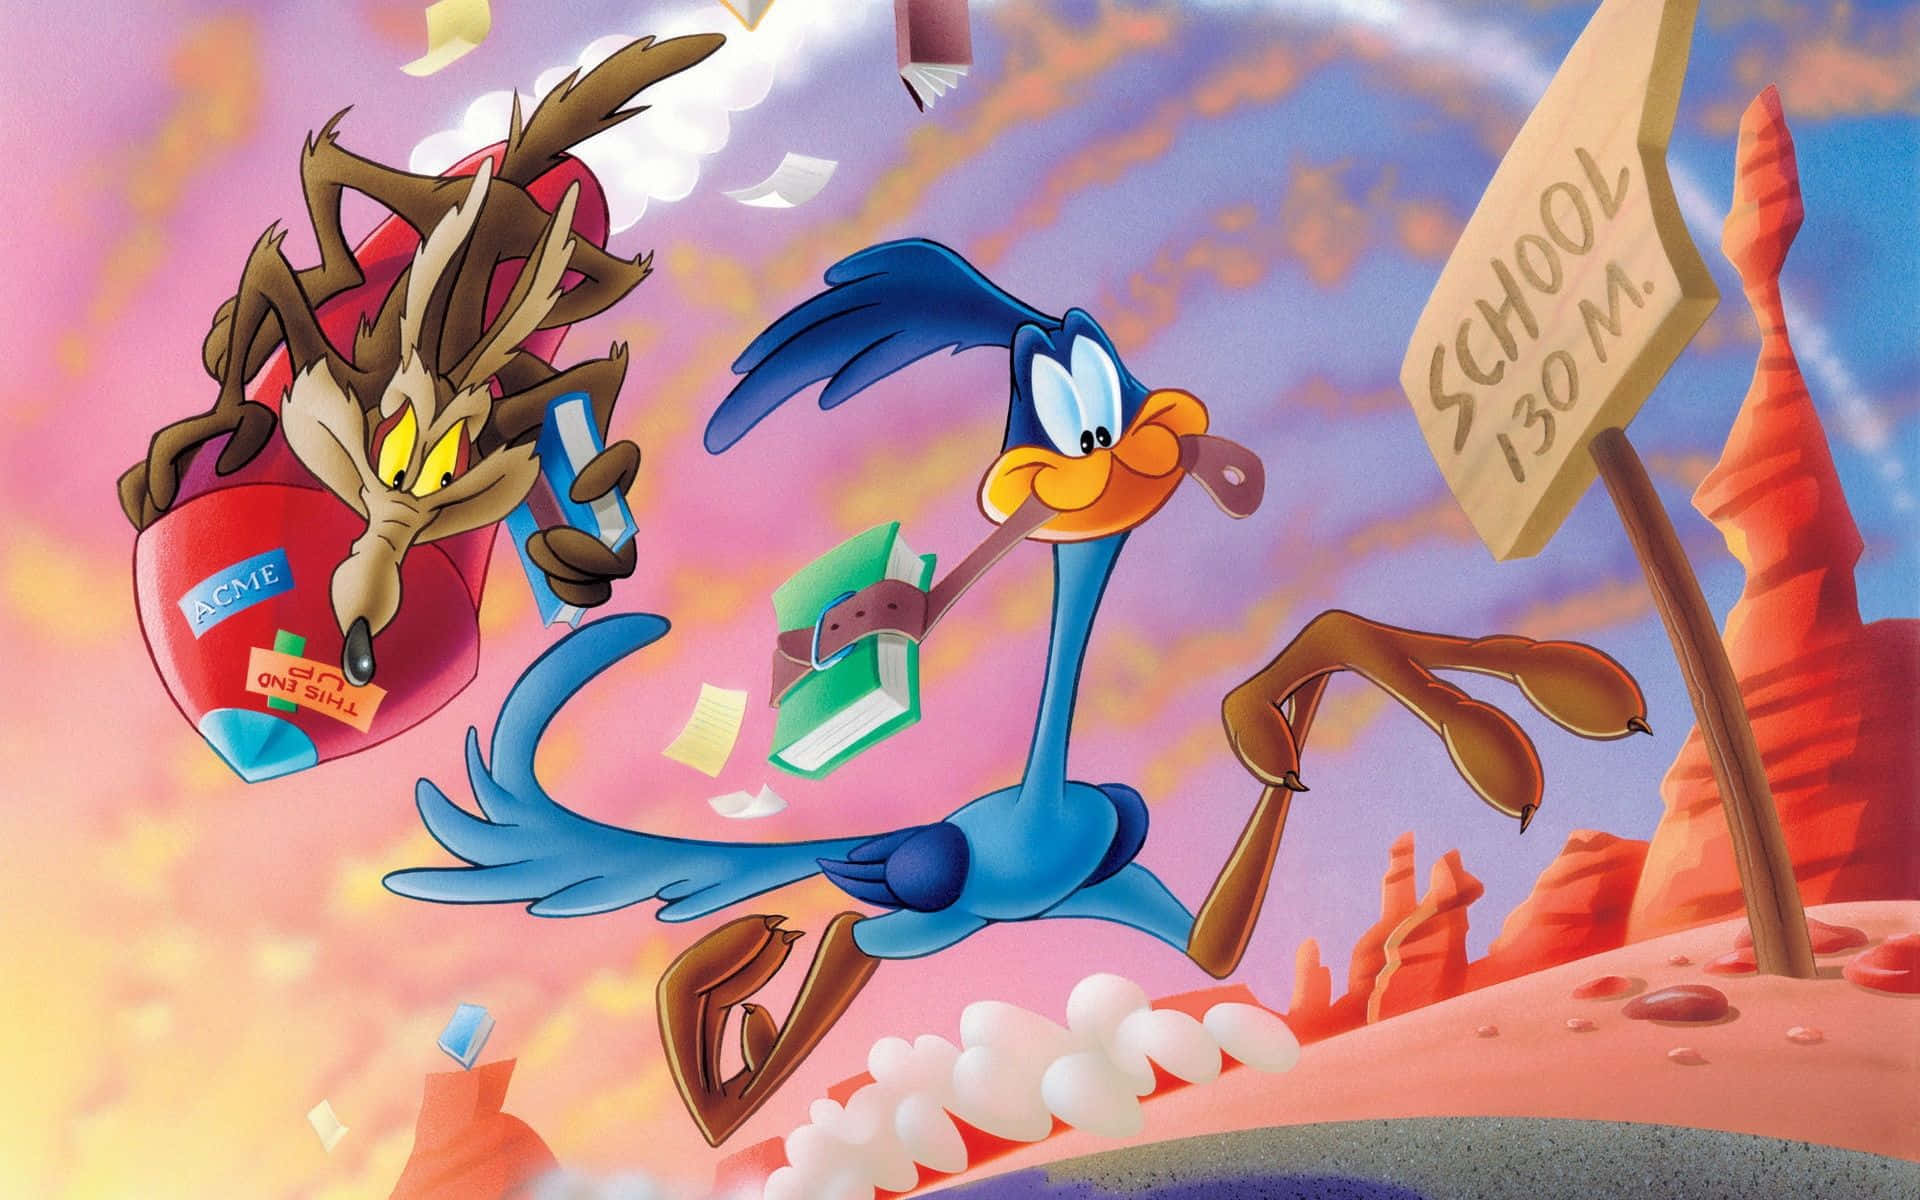 Wile E. Coyote And Road Runner Wallpaper